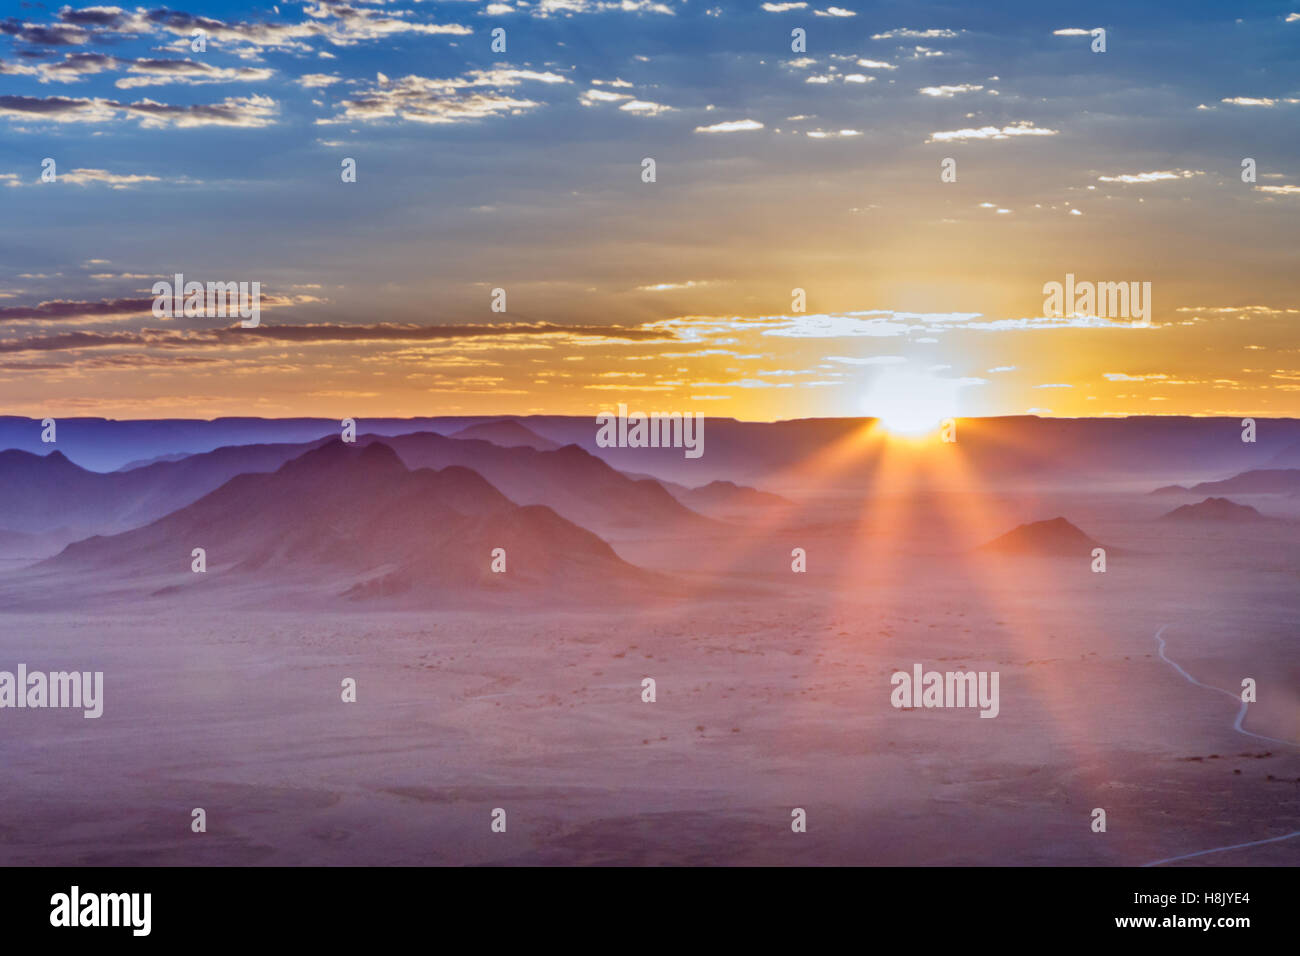 Sunrise with the suns rays peeping over the horizon  in Sossusvlei Namibia giving a lunar appearance to the landscape Stock Photo